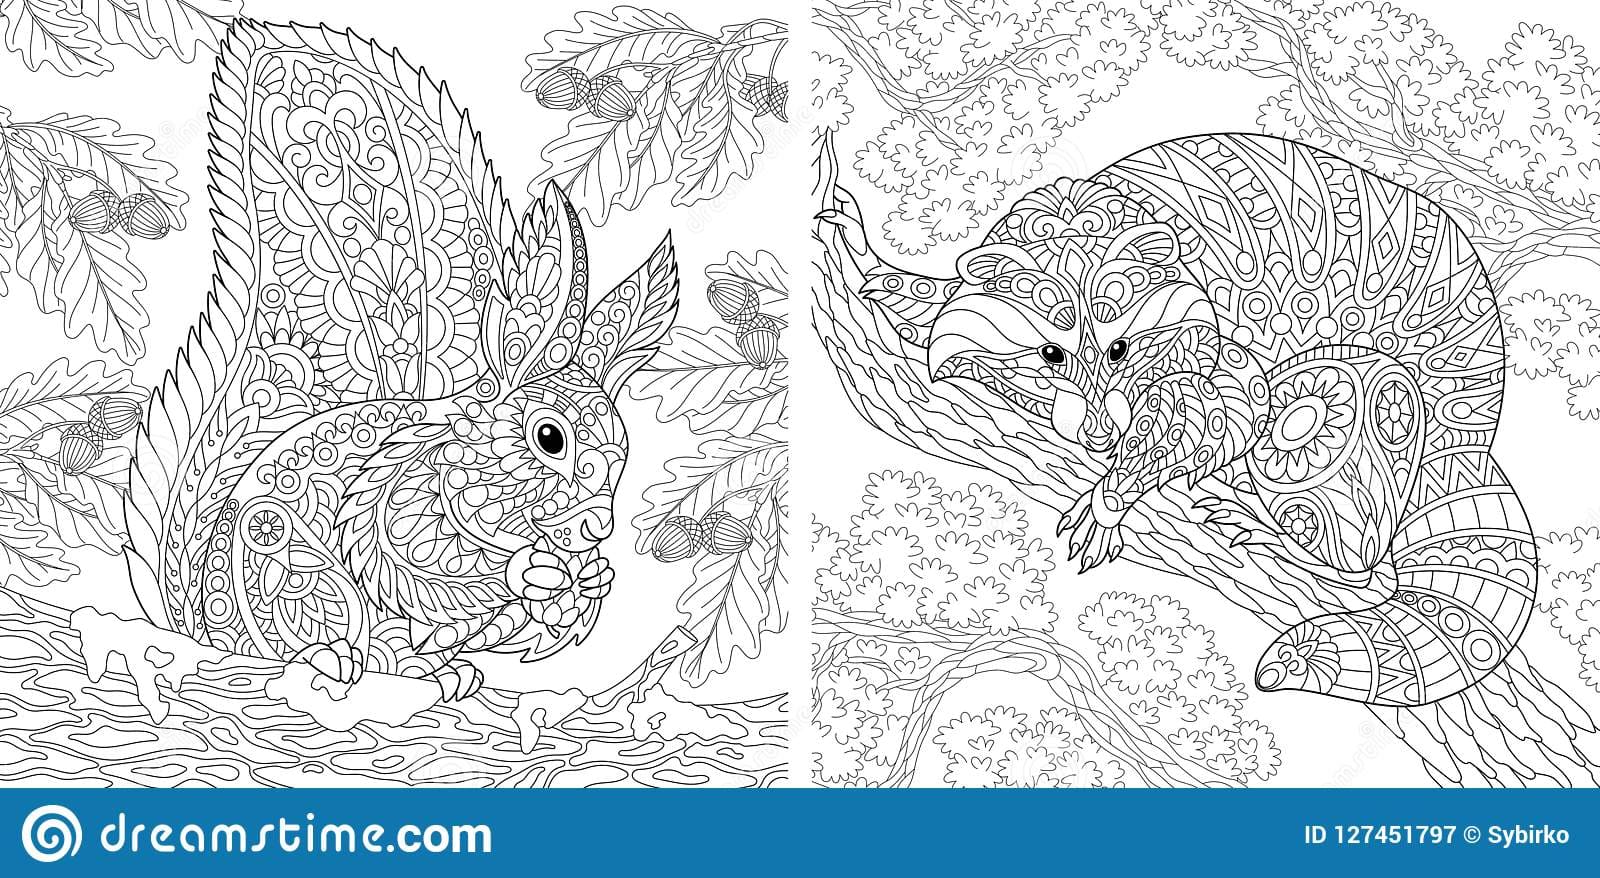 Coloring pages With Squirrel And Raccoon